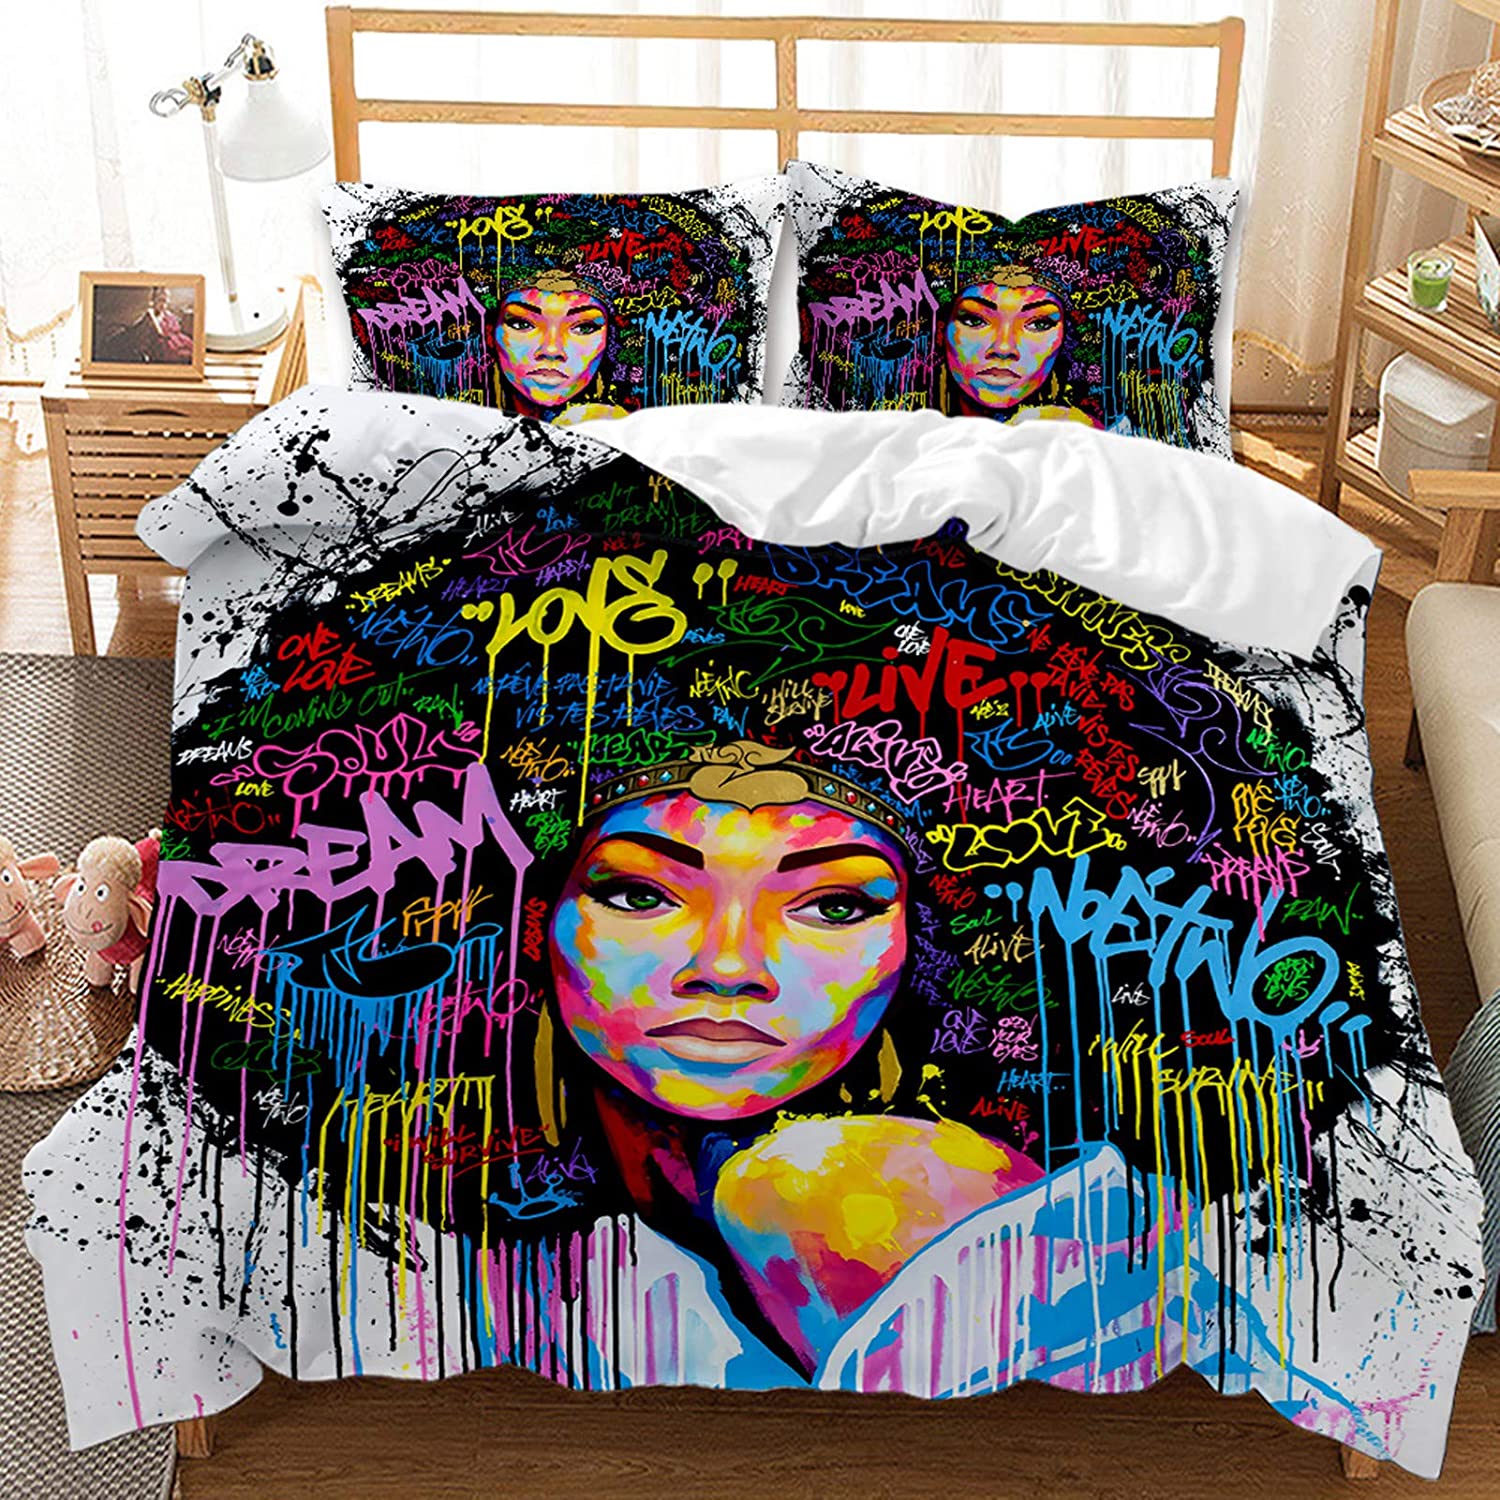 Bedding Set For Teens – Funky Bedding For Teens Comes in a Variety of Sizes, From Twin to Queen